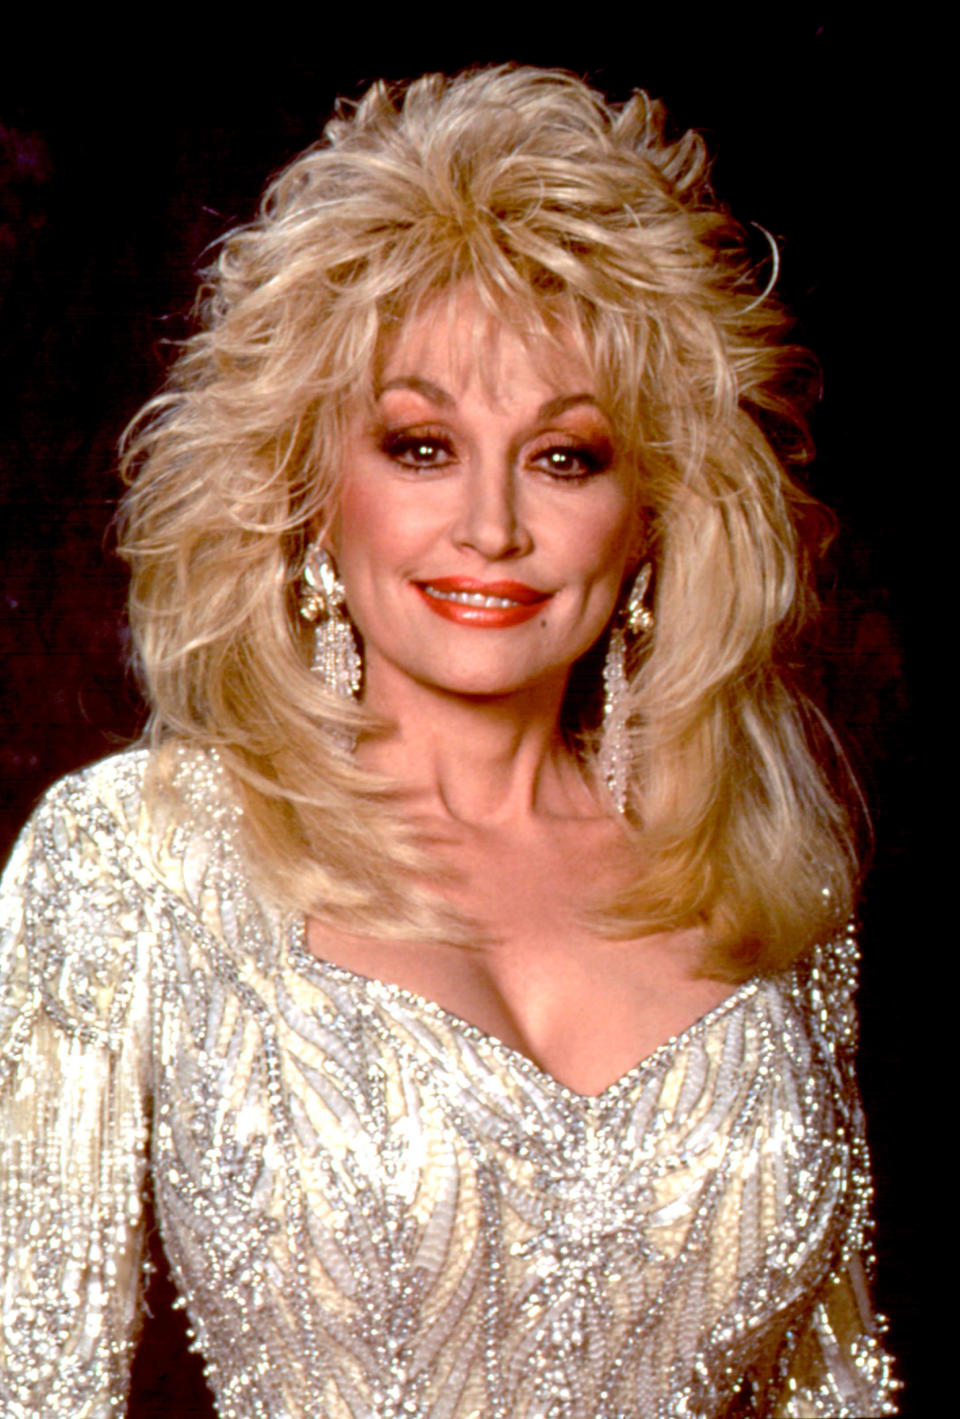 The country and gay icon Dolly Parton has seen her <a href="http://www.huffingtonpost.com/2012/11/27/dolly-parton-gay-rumors-drag-queen-contest_n_2197891.html">fair share of gay rumors</a>, despite being married to her husband Carl Dean for 46 years. Parton's relationship with her childhood best friend, Judy, was subject to speculation and the artist compared her rumors with that of Oprah's, saying, "Like Gayle [King], her friend, Judy, my friend...they just think that you just can't be that close to somebody," Parton said. "Judy and I have been best friends since we were like in the third and fourth grade. We still just have a great friendship and relationship and I love her as much as I love anybody in the whole world, but we're not romantically involved."